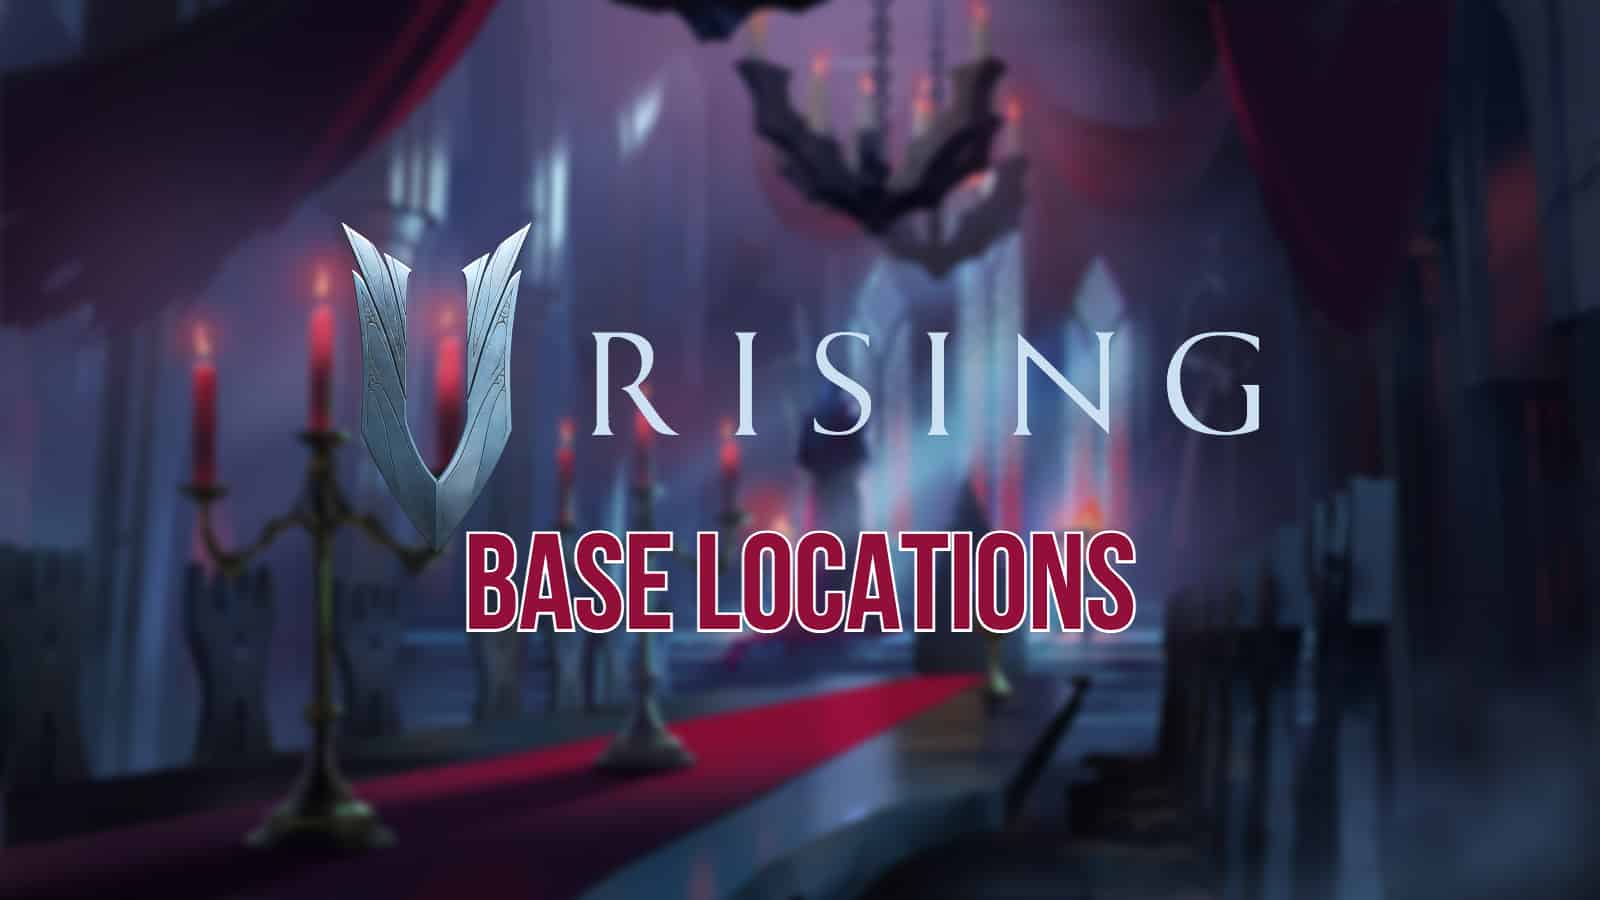 v rising best base locations feature image